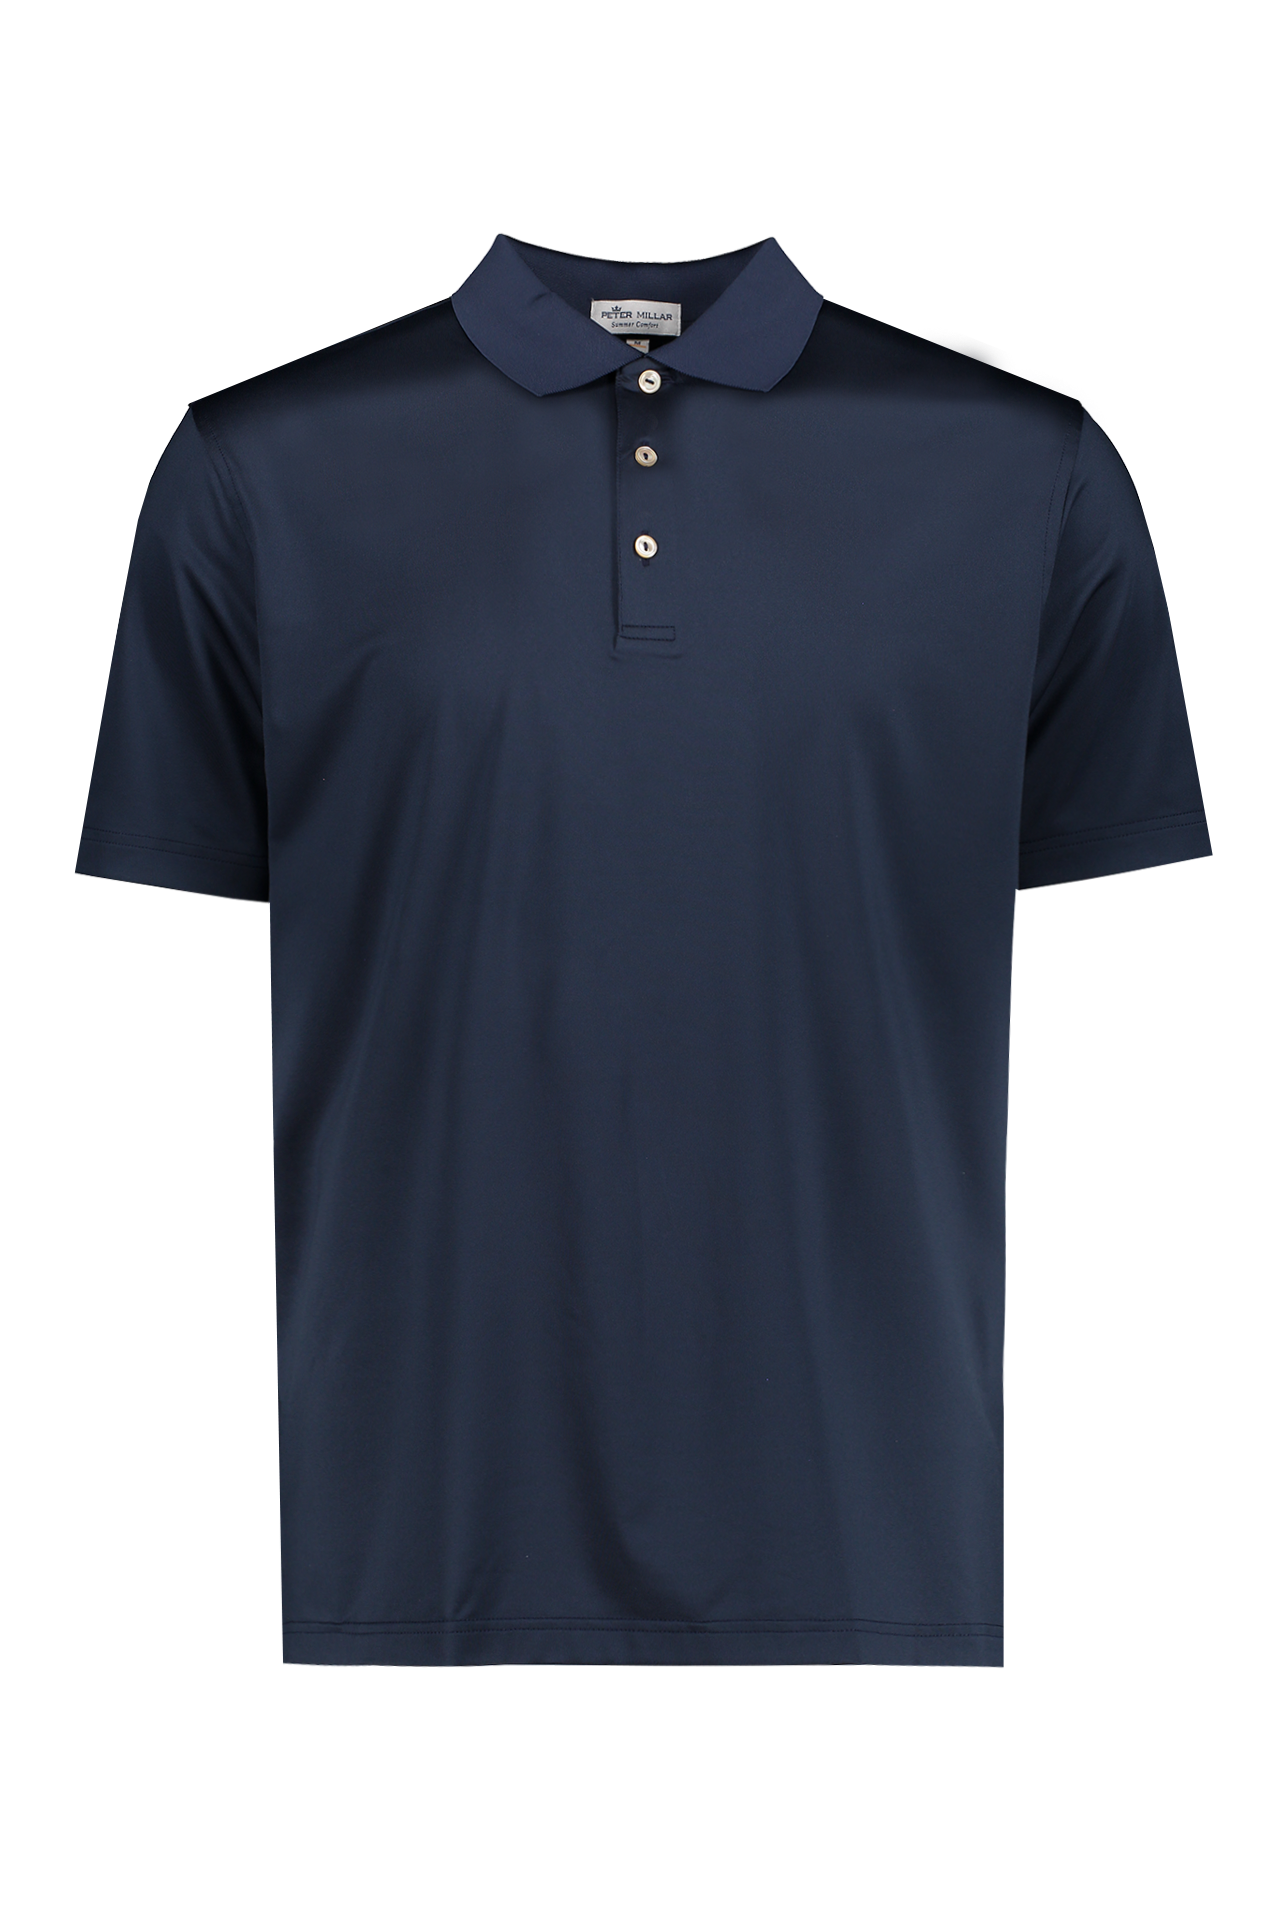 Peter Millar Solid Performance Jersey Polo in Navy - Mannequin Image  (6606330462323)